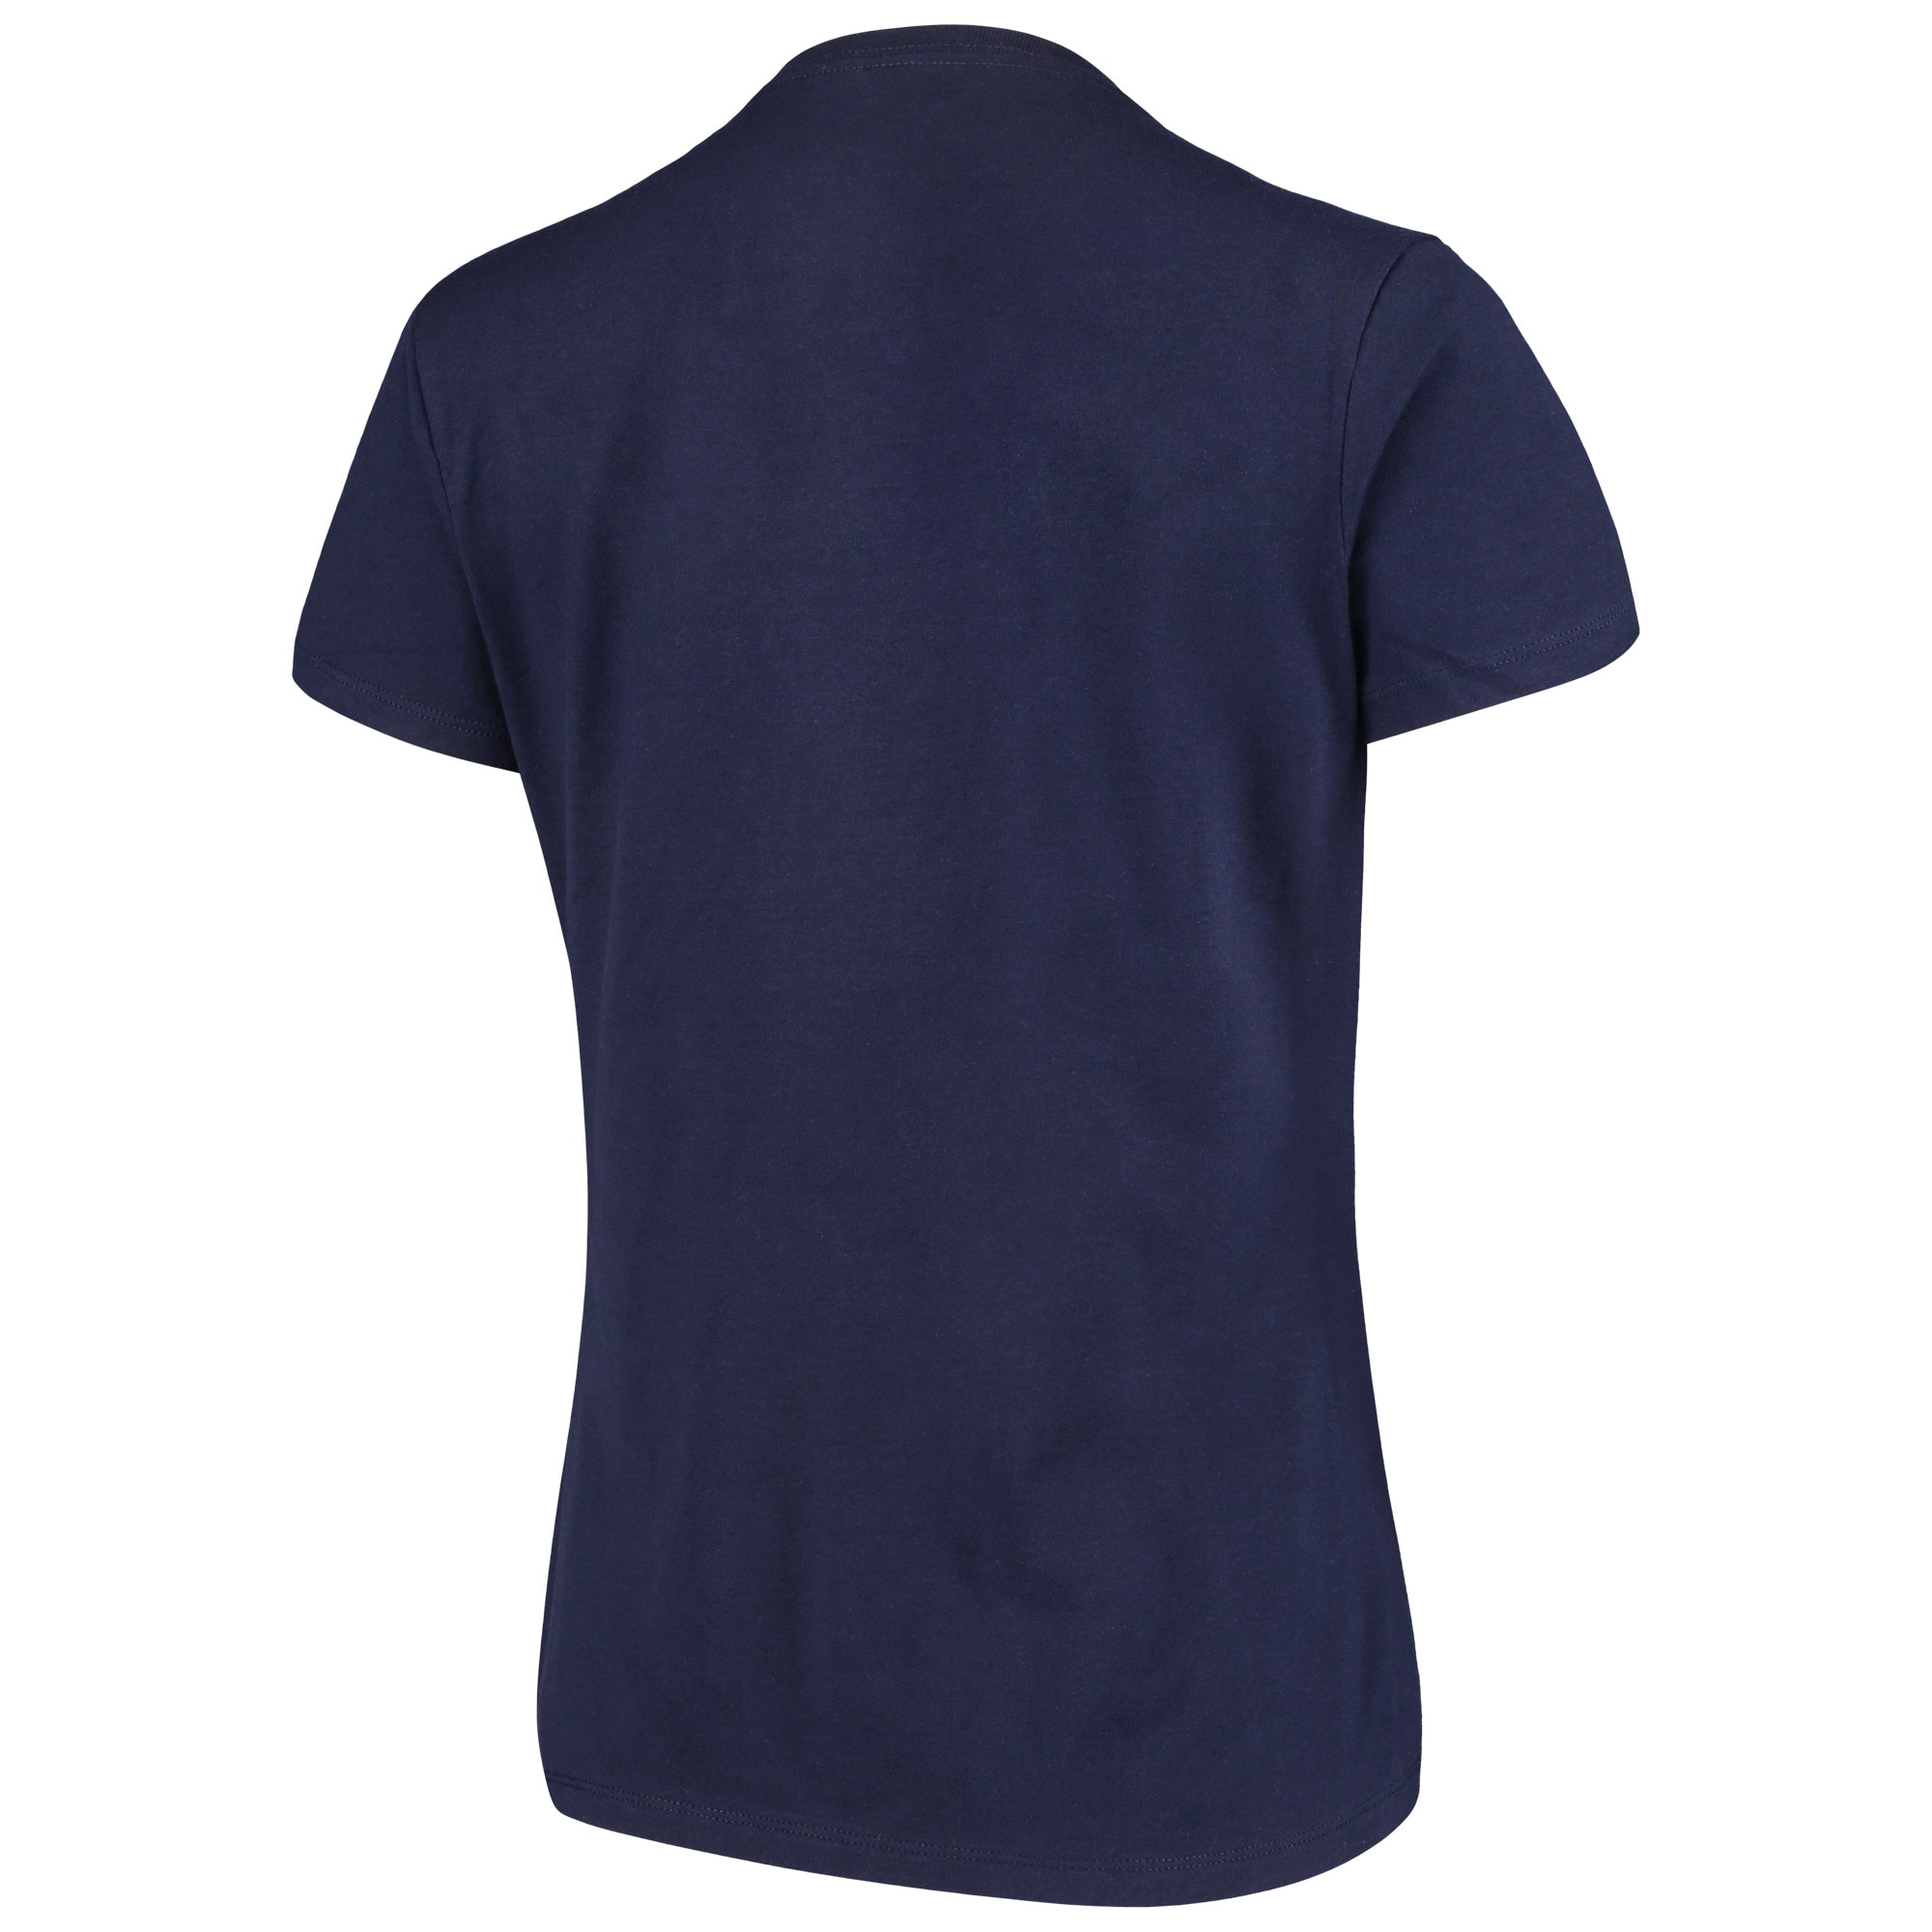 Virginia Cavaliers Russell Athletic Women's Arch V-Neck T-Shirt - Navy - image 3 of 3